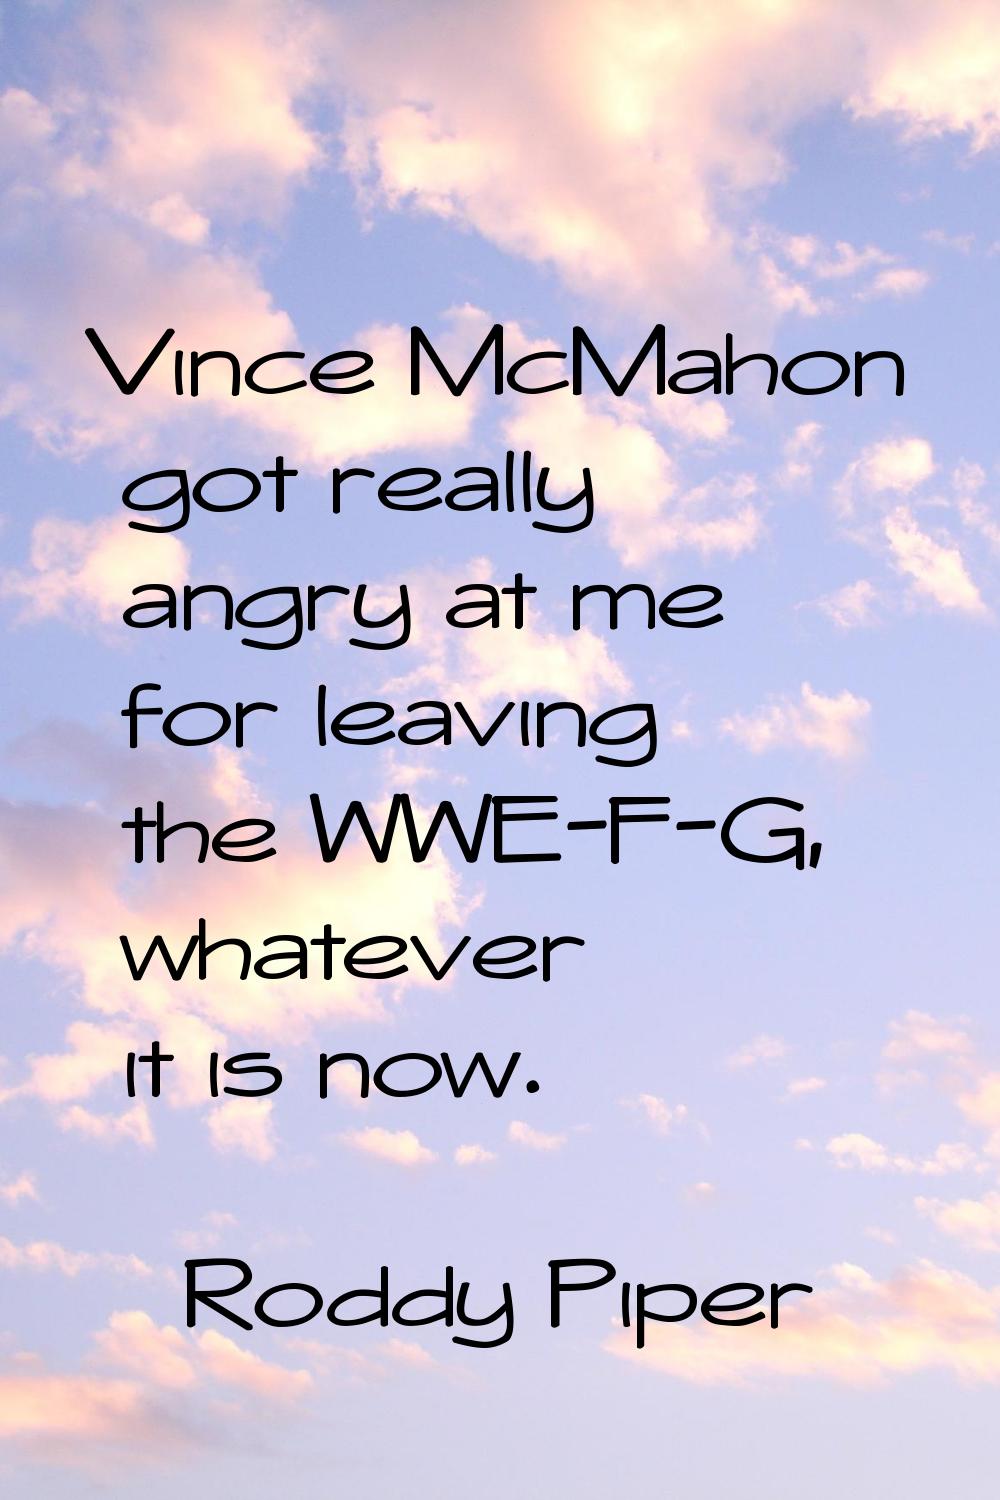 Vince McMahon got really angry at me for leaving the WWE-F-G, whatever it is now.